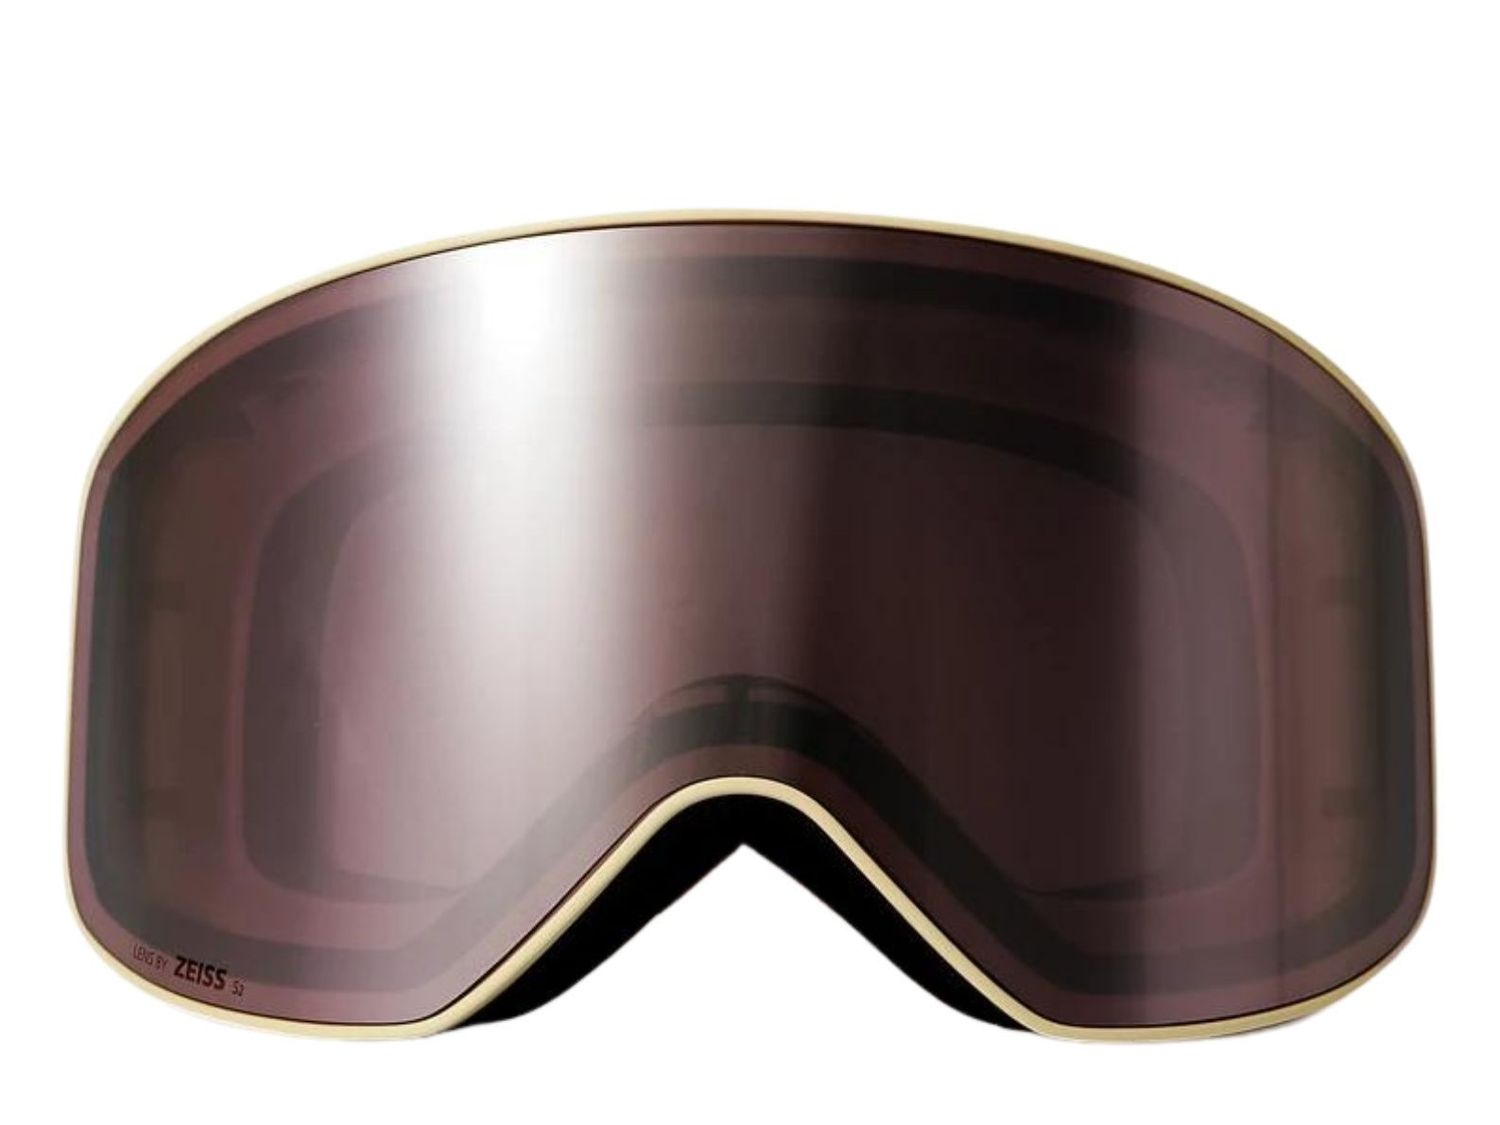 Luxury Ski Goggles: Combining Fashion and Function on the Slopes –